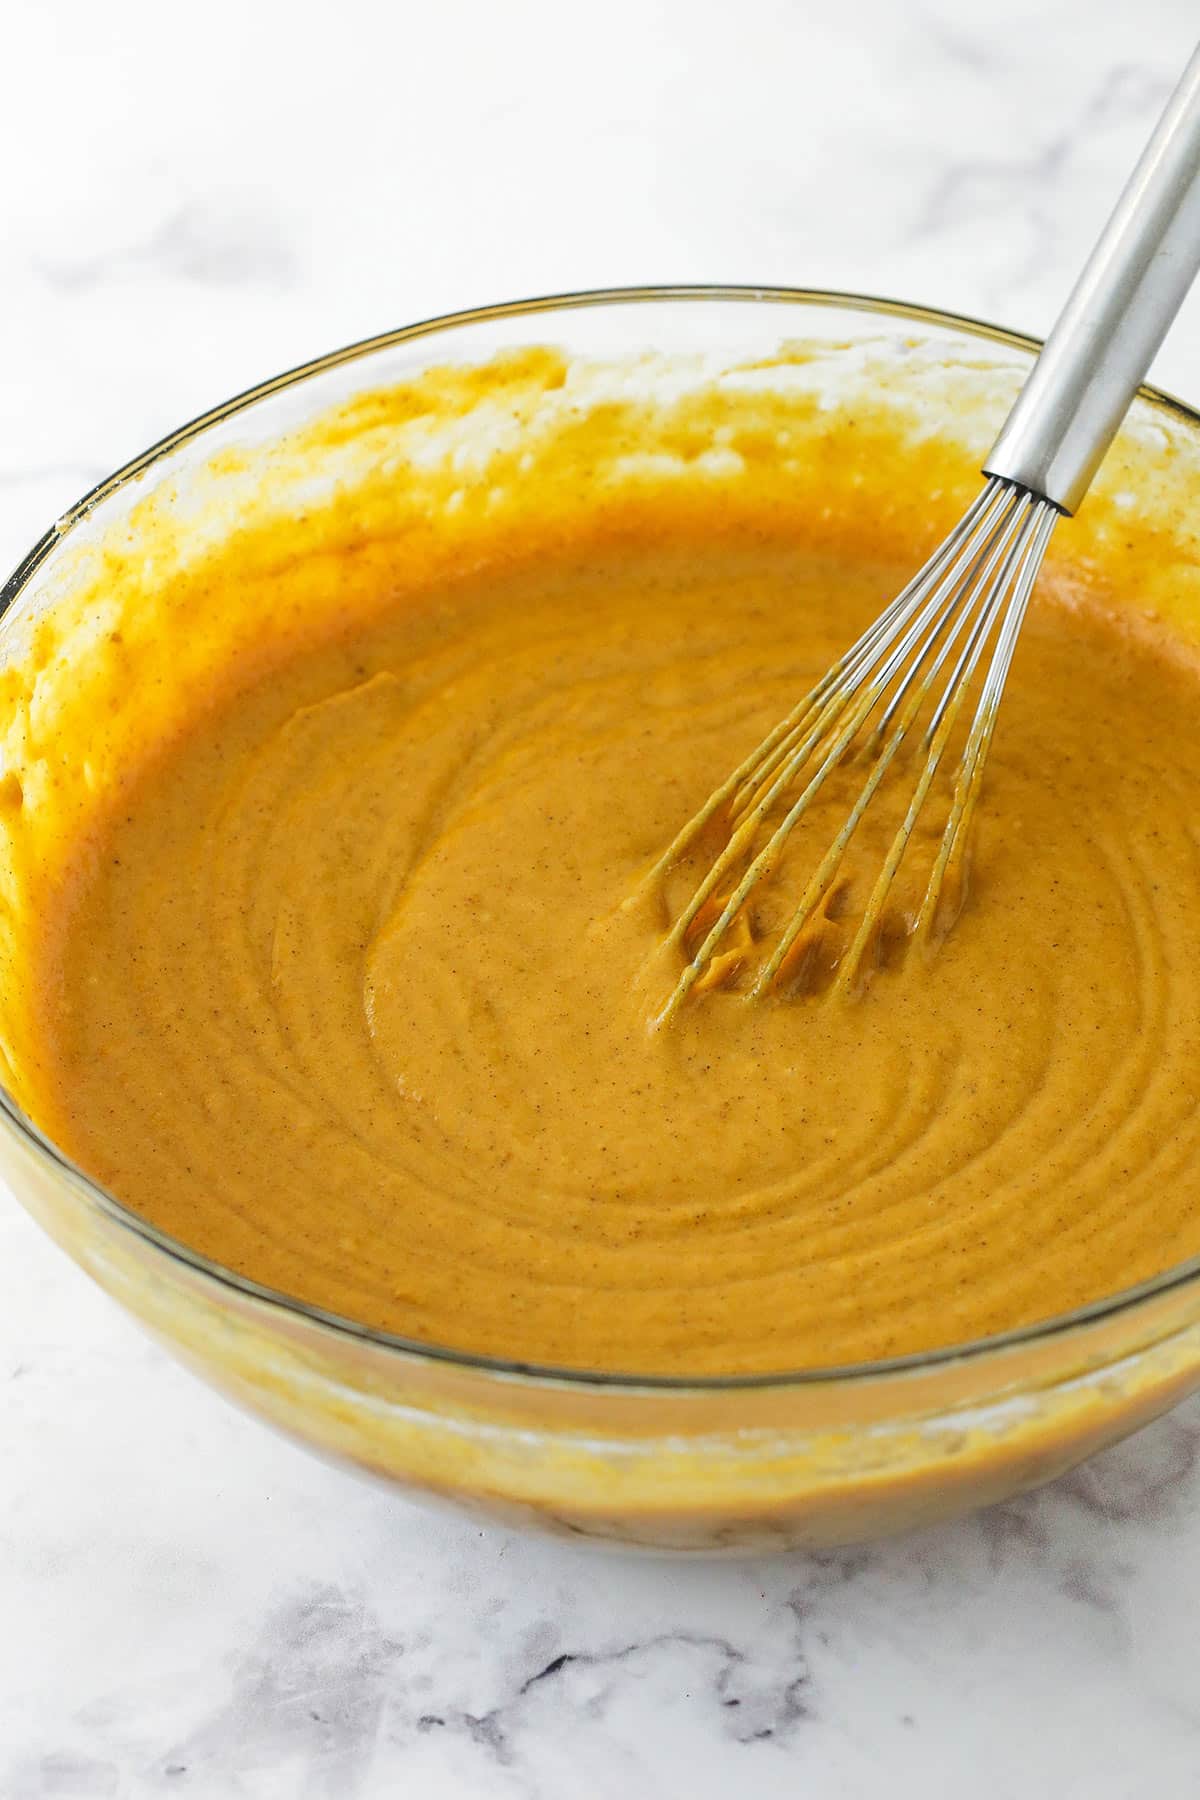 Pumpkin cake batter in a glass mixing bowl with a metal whisk inside